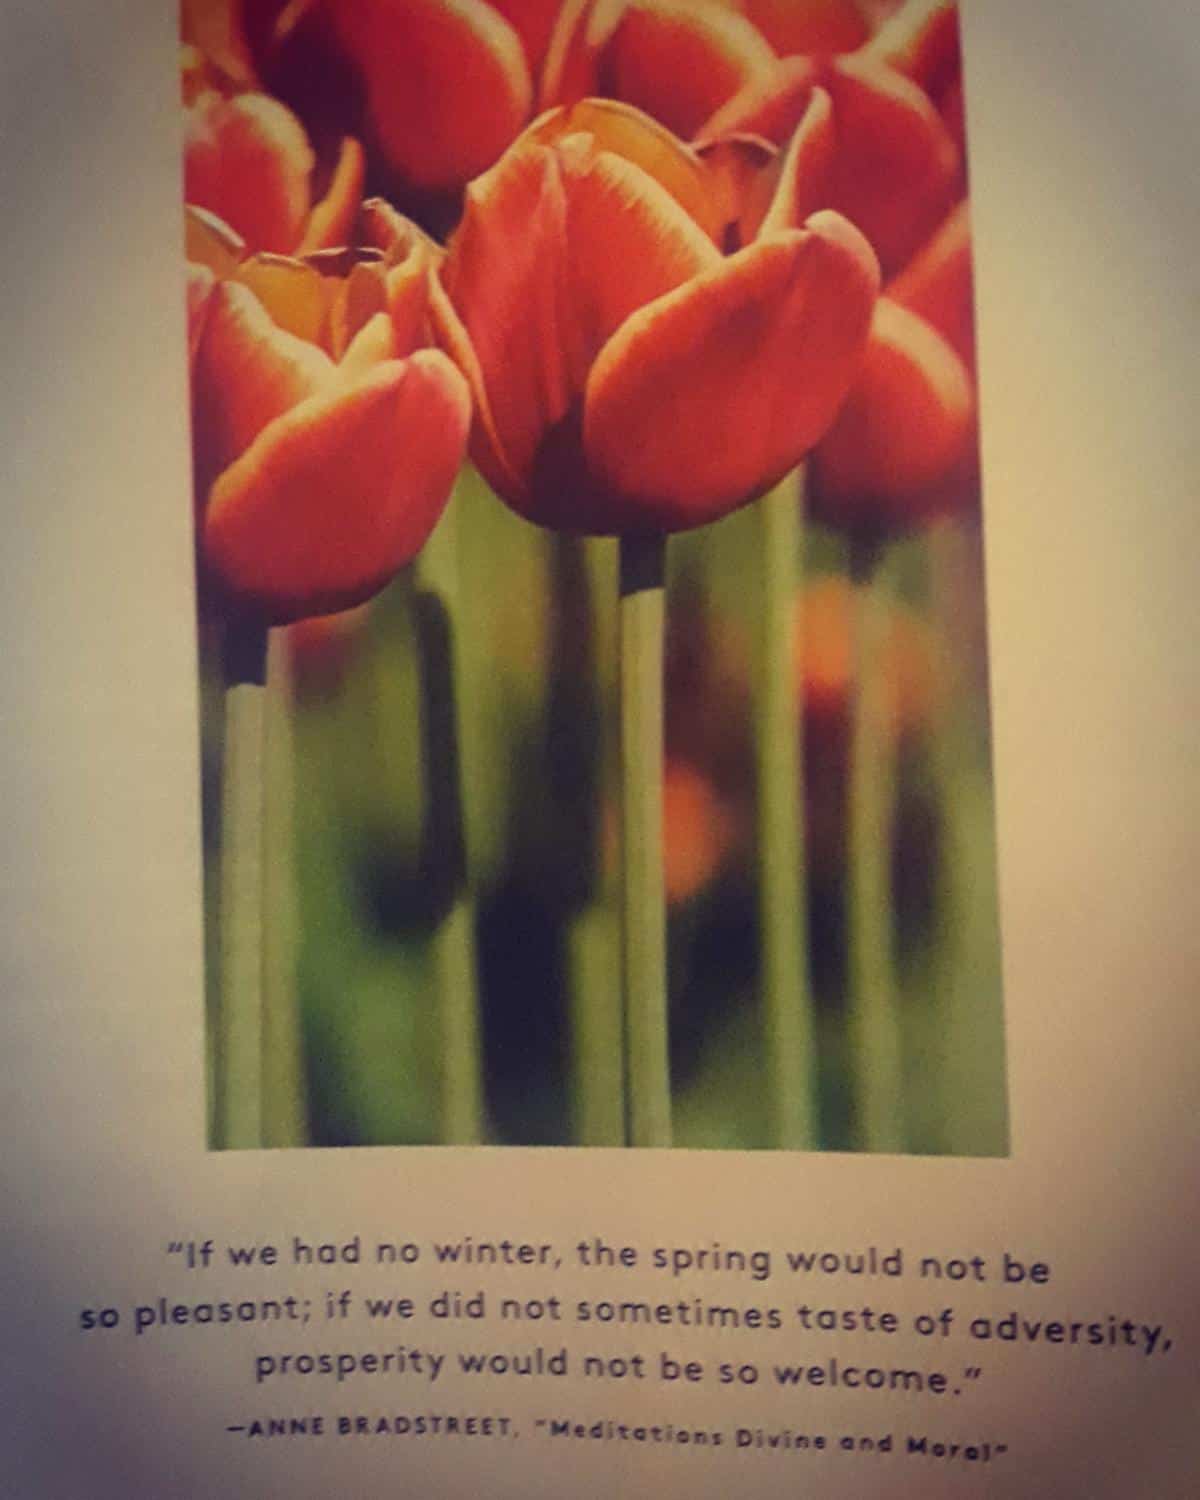 Image of a flower and a quote about valentines.